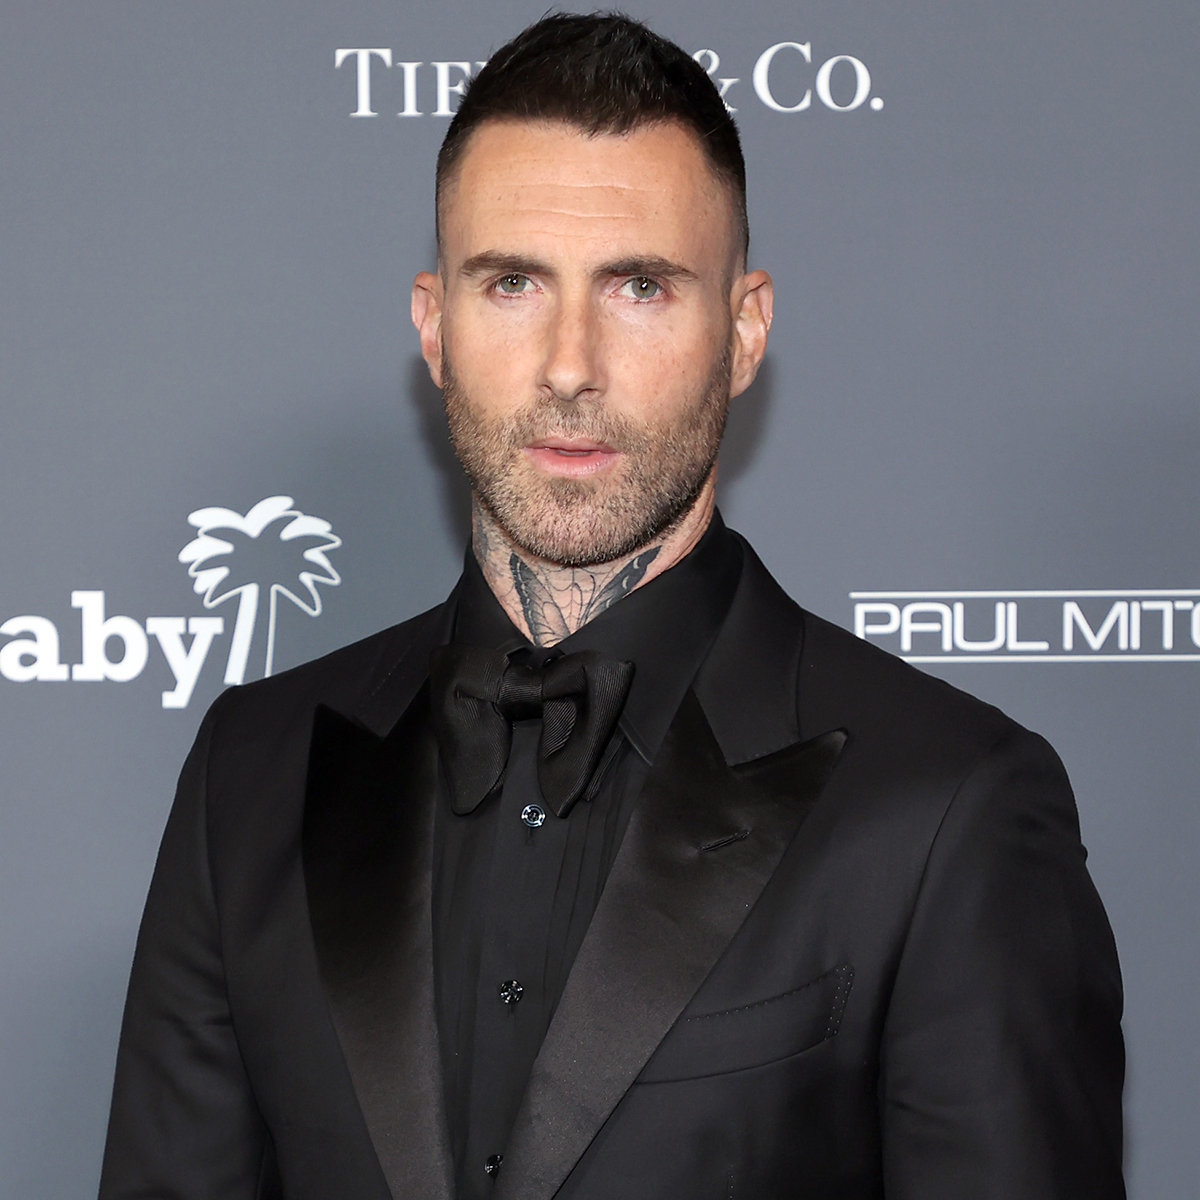 Adam Levine Returns to Stage After Scandal With Wife Behati’s Support